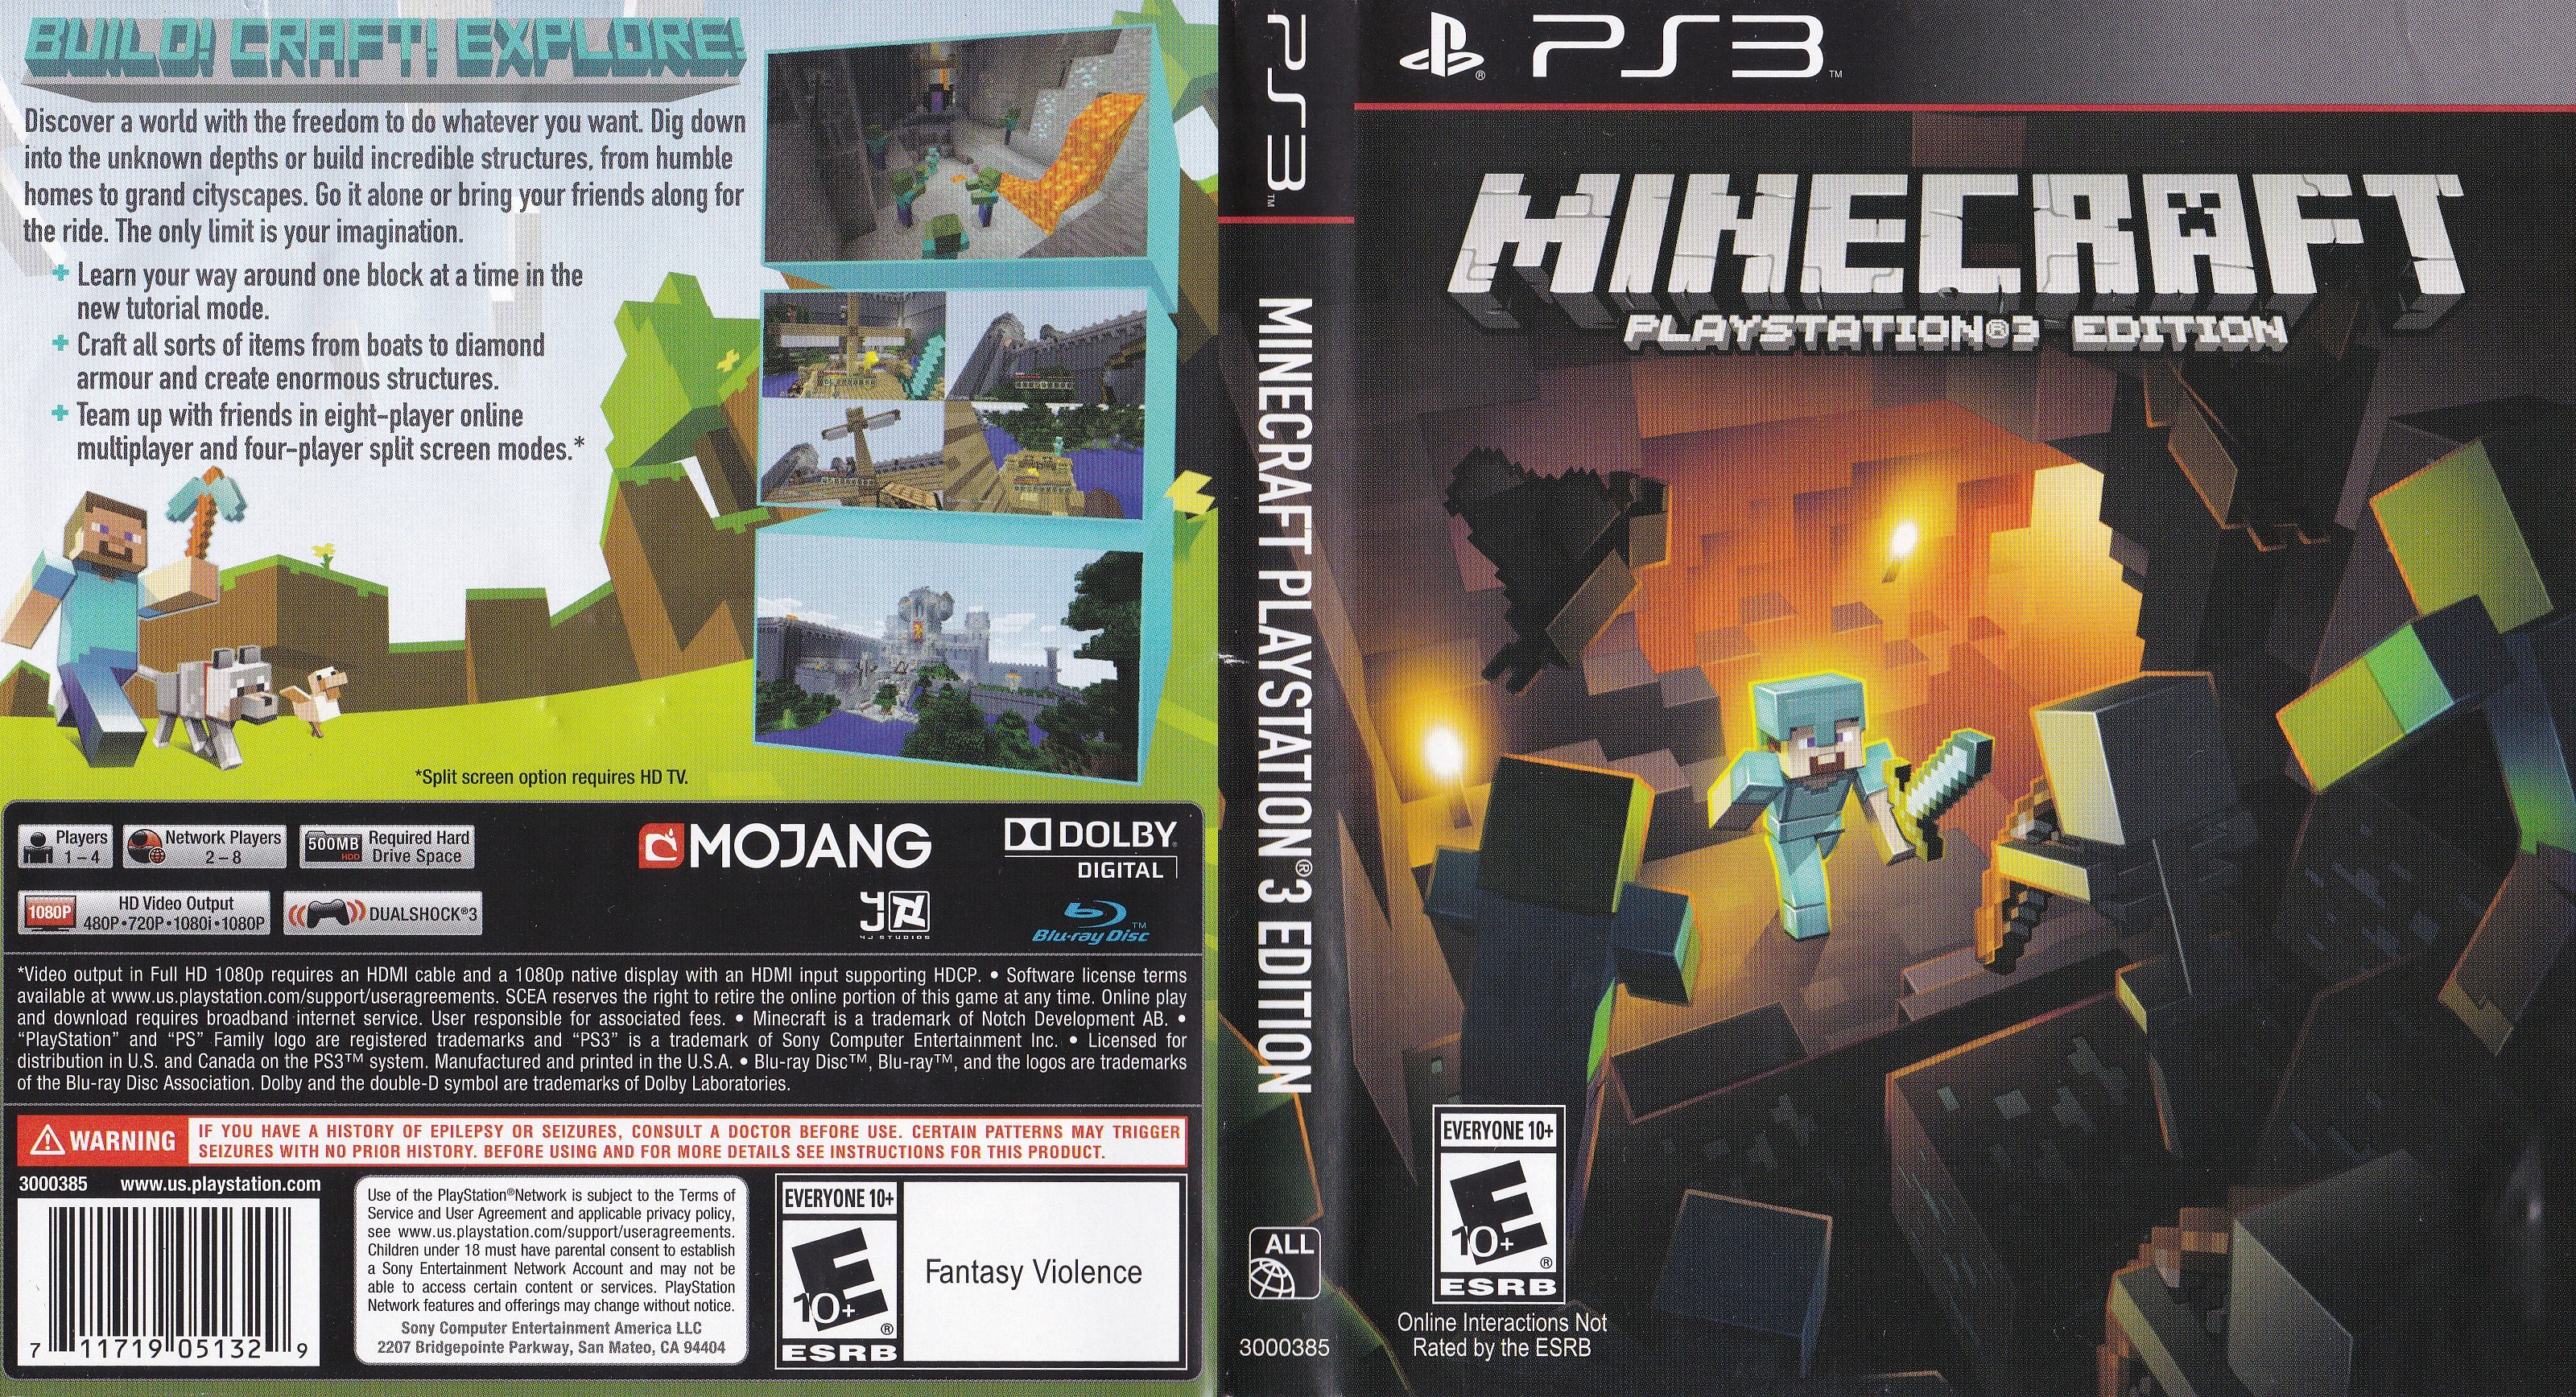 Minecraft PlayStation 3 Edition PS3 Game (in Good Condition)